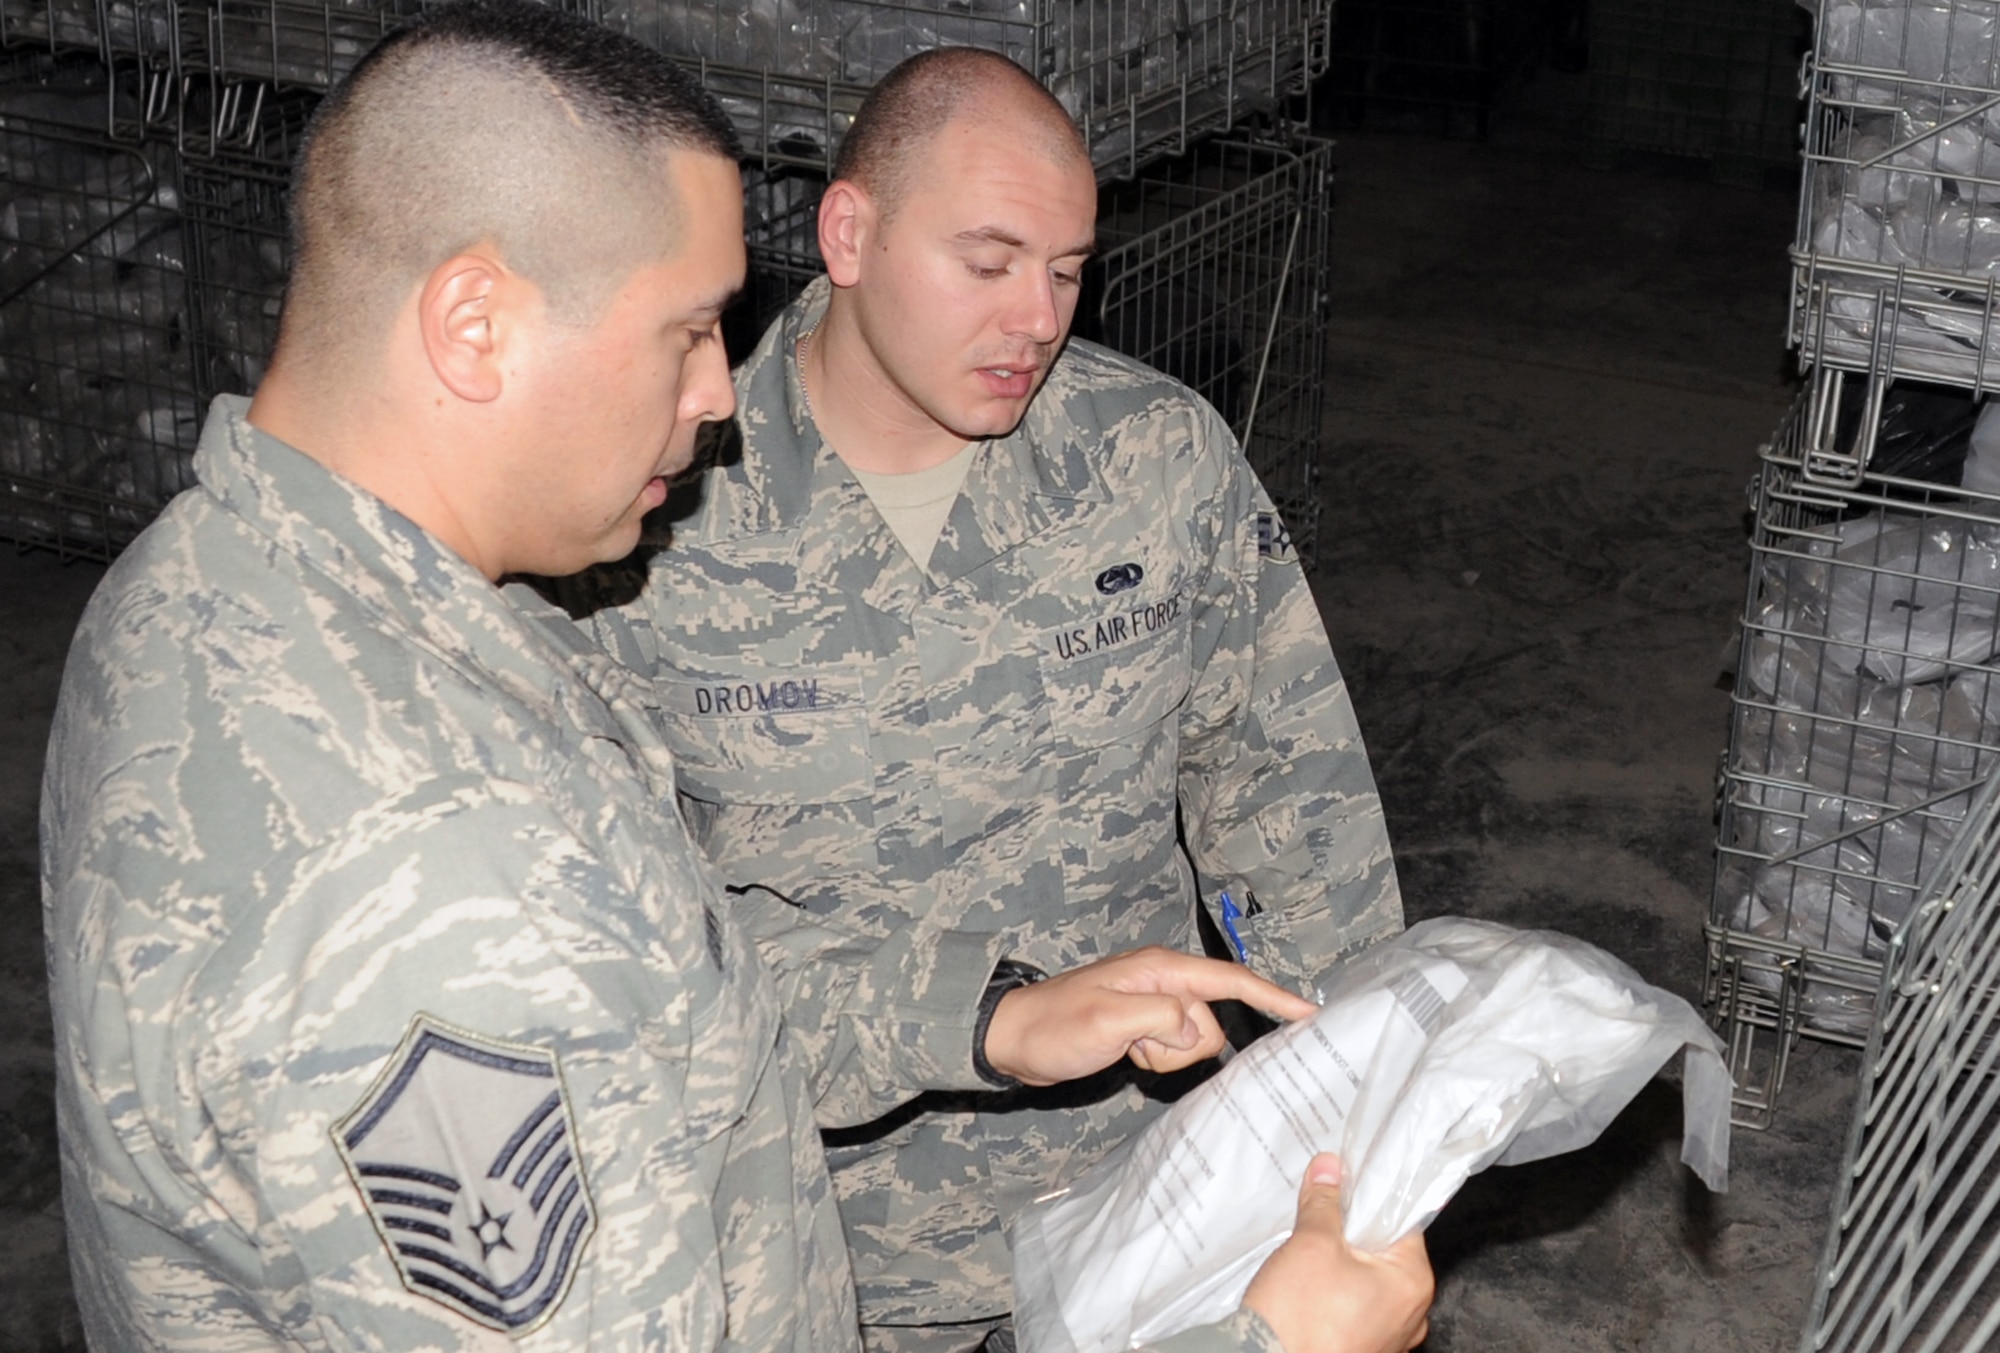 Master Sgt. Alex Brown checks over inventory numbers with Senior Airman Alex Dromov in the supply warehouse for the 380th Expeditionary Logistics Readiness Squadron at a non-disclosed base in Southwest Asia on March 6, 2010. Both work in the ?Desert Depot,? otherwise known as the base supply store and both are material management Airman deployed with the 380th ELRS. (U.S. Air Force Photo/Master Sgt. Scott T. Sturkol)